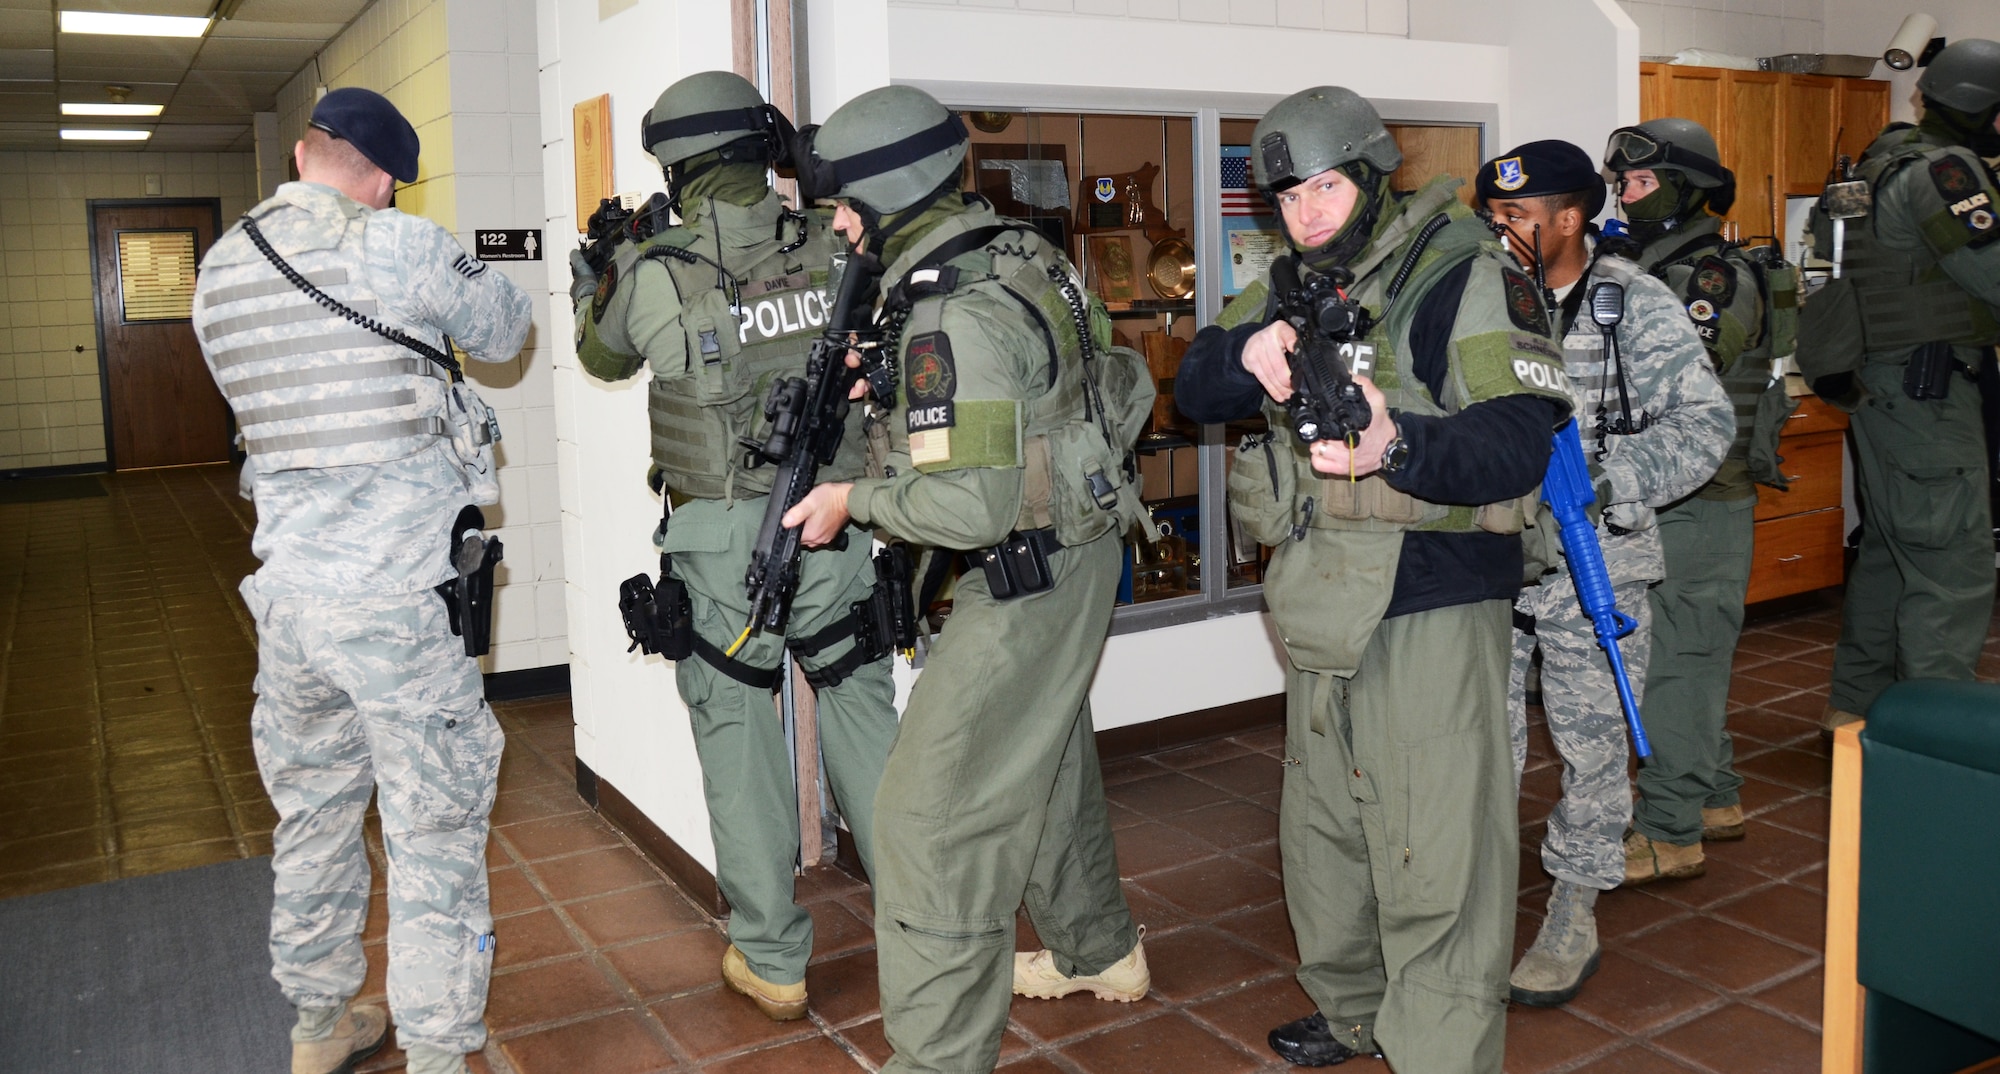 Baltimore County Police SWAT team members and Maryland Air National Guard Security Forces sweep the civil engineering building at Martin State Airport on Wednesday, January 15, 2014 looking for an active shooter during an exercise. The active shooter exercise allowed first responders from the Warfield Air National Guard Base and the local police a chance to work together in a simulated situation. (Air National Guard photo by Tech. Sgt. David Speicher/RELEASED)